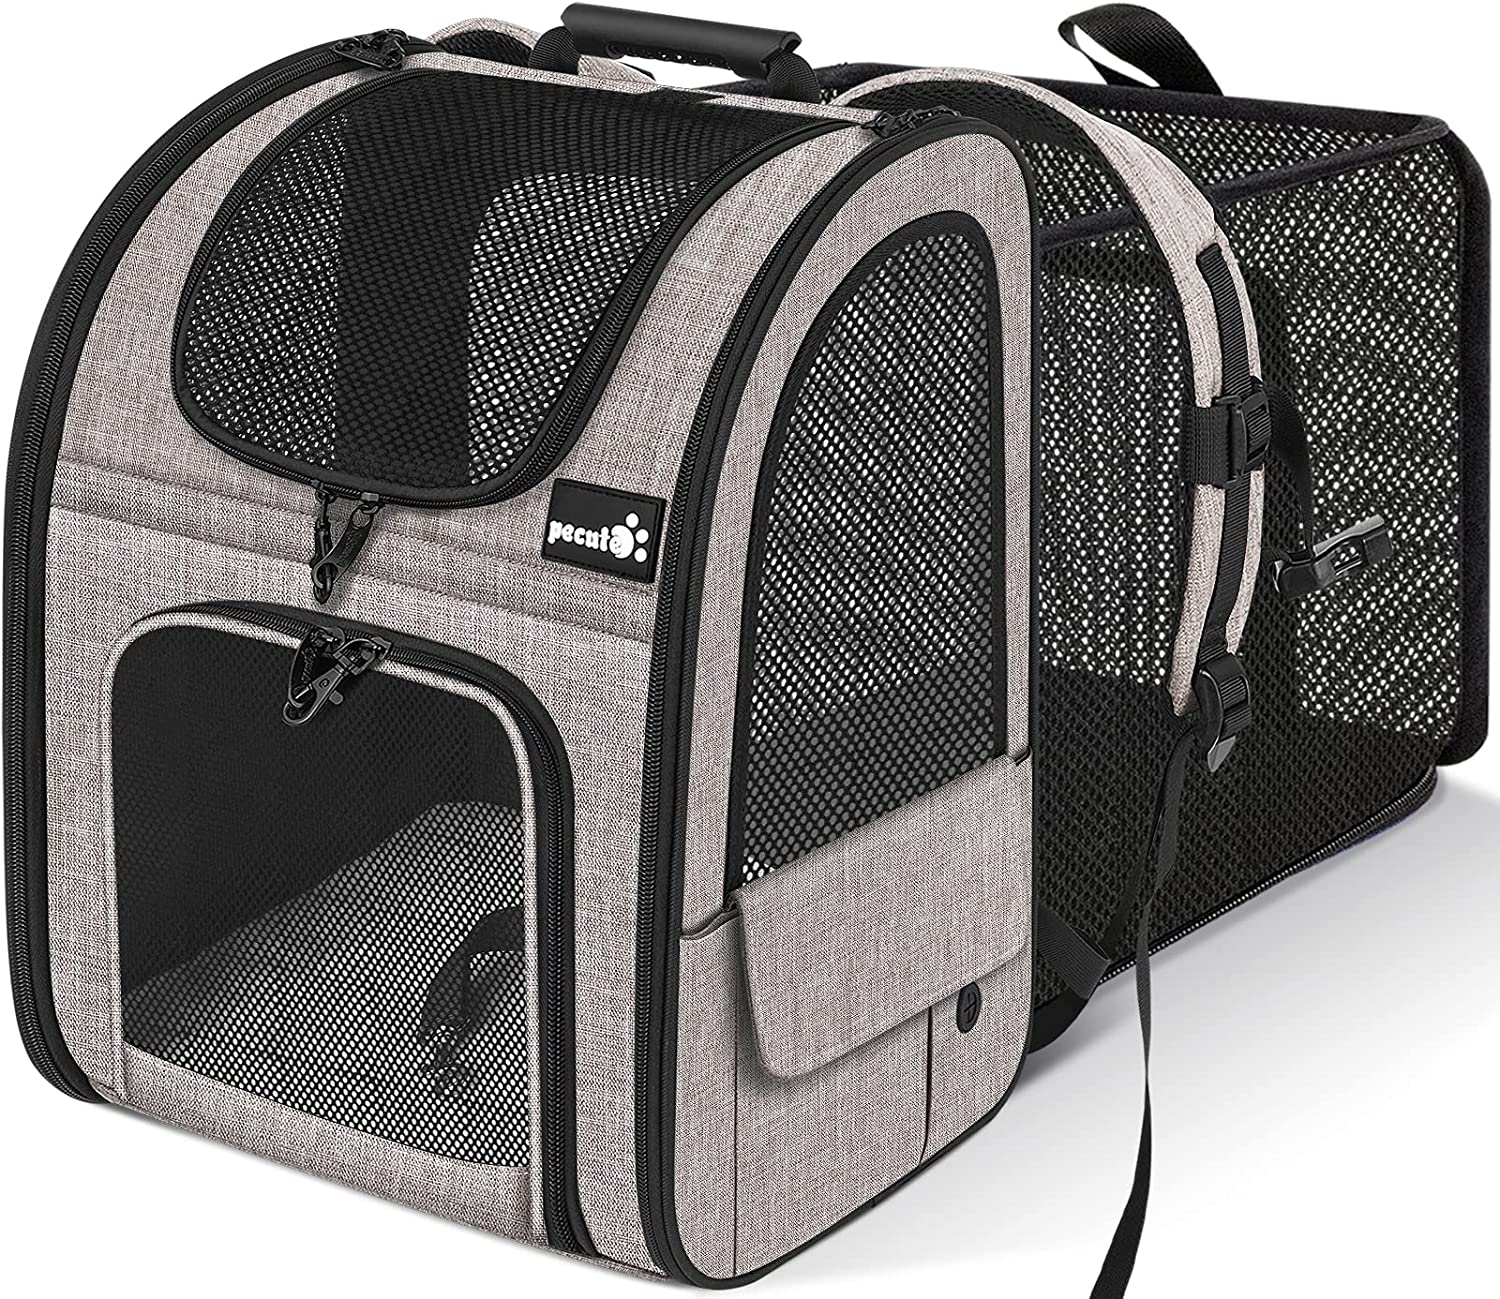 Pecute Dog Carrier Backpack